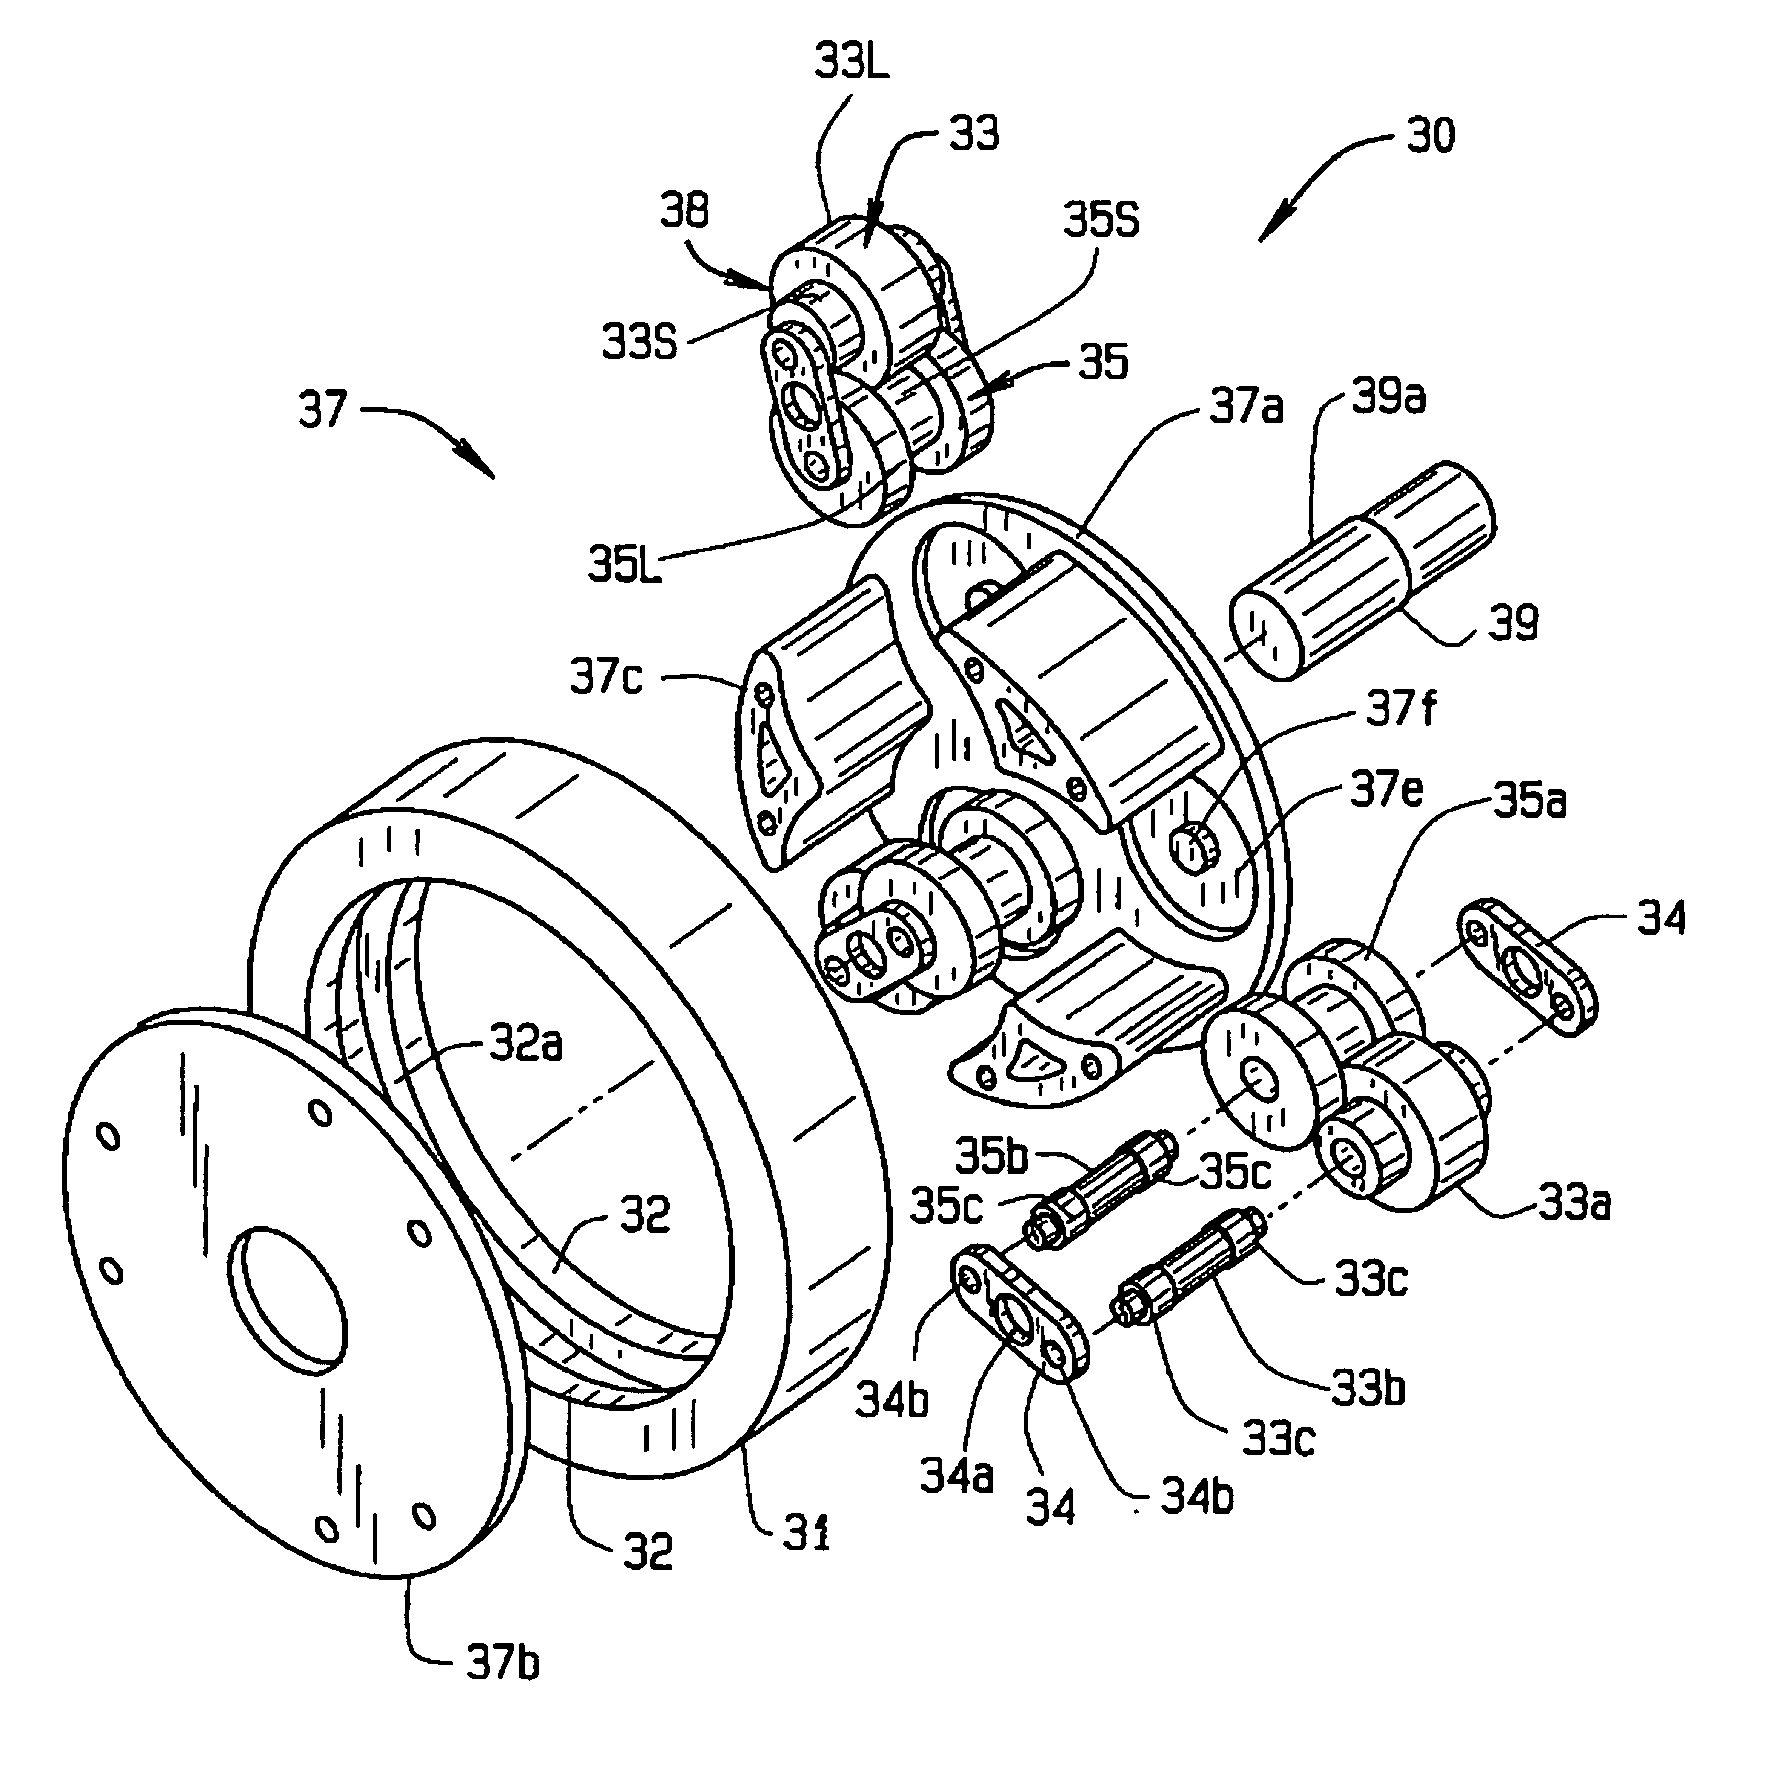 Variable Speed Supercharger With Electric Power Generation